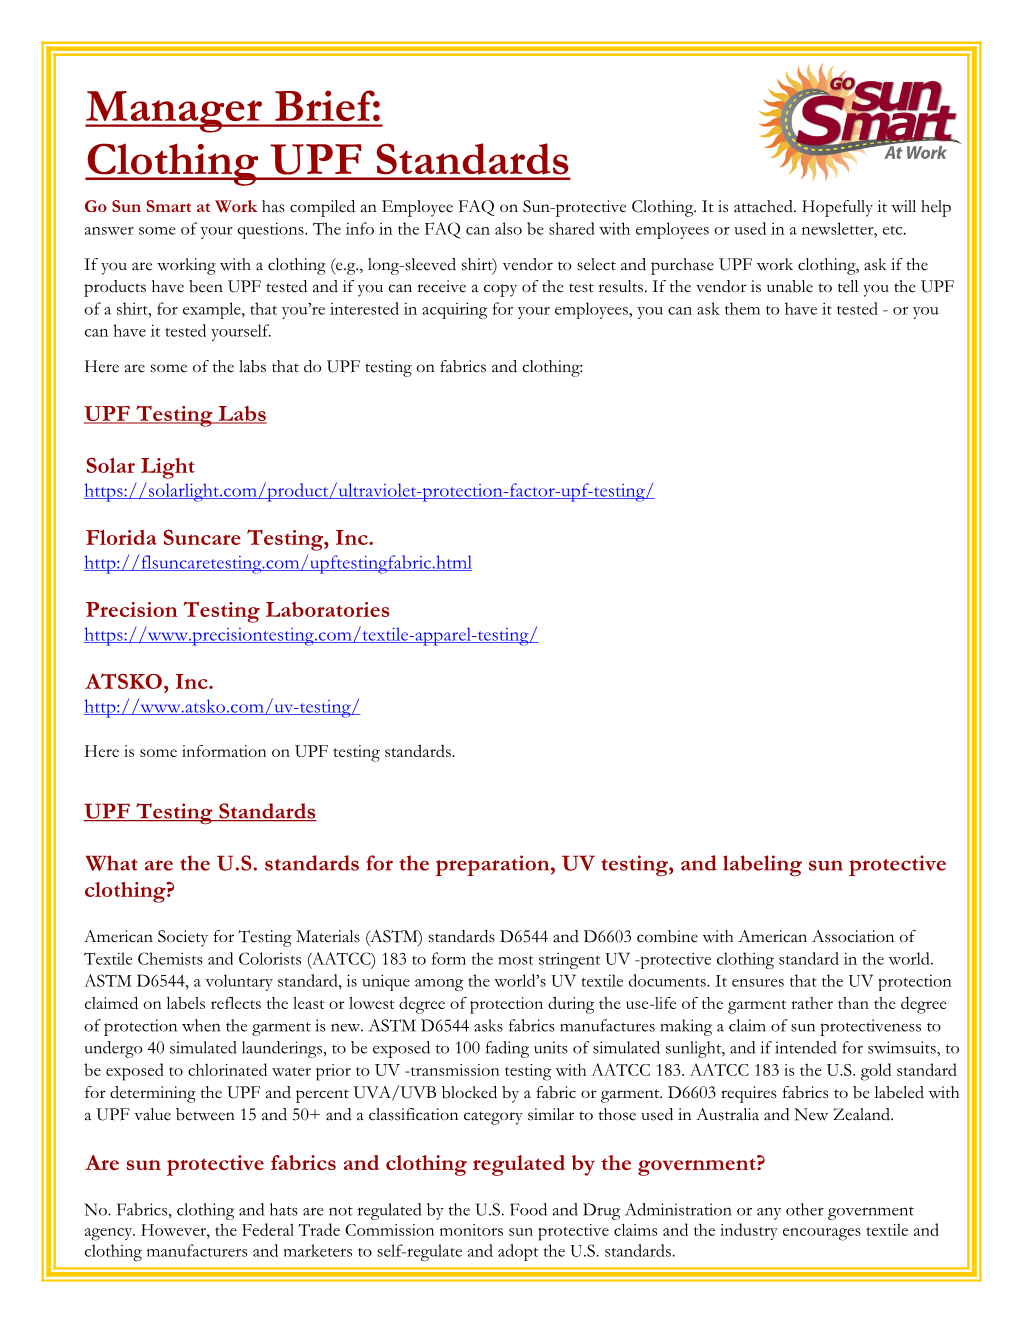 Clothing UPF Standards Go Sun Smart at Work Has Compiled an Employee FAQ on Sun-Protective Clothing